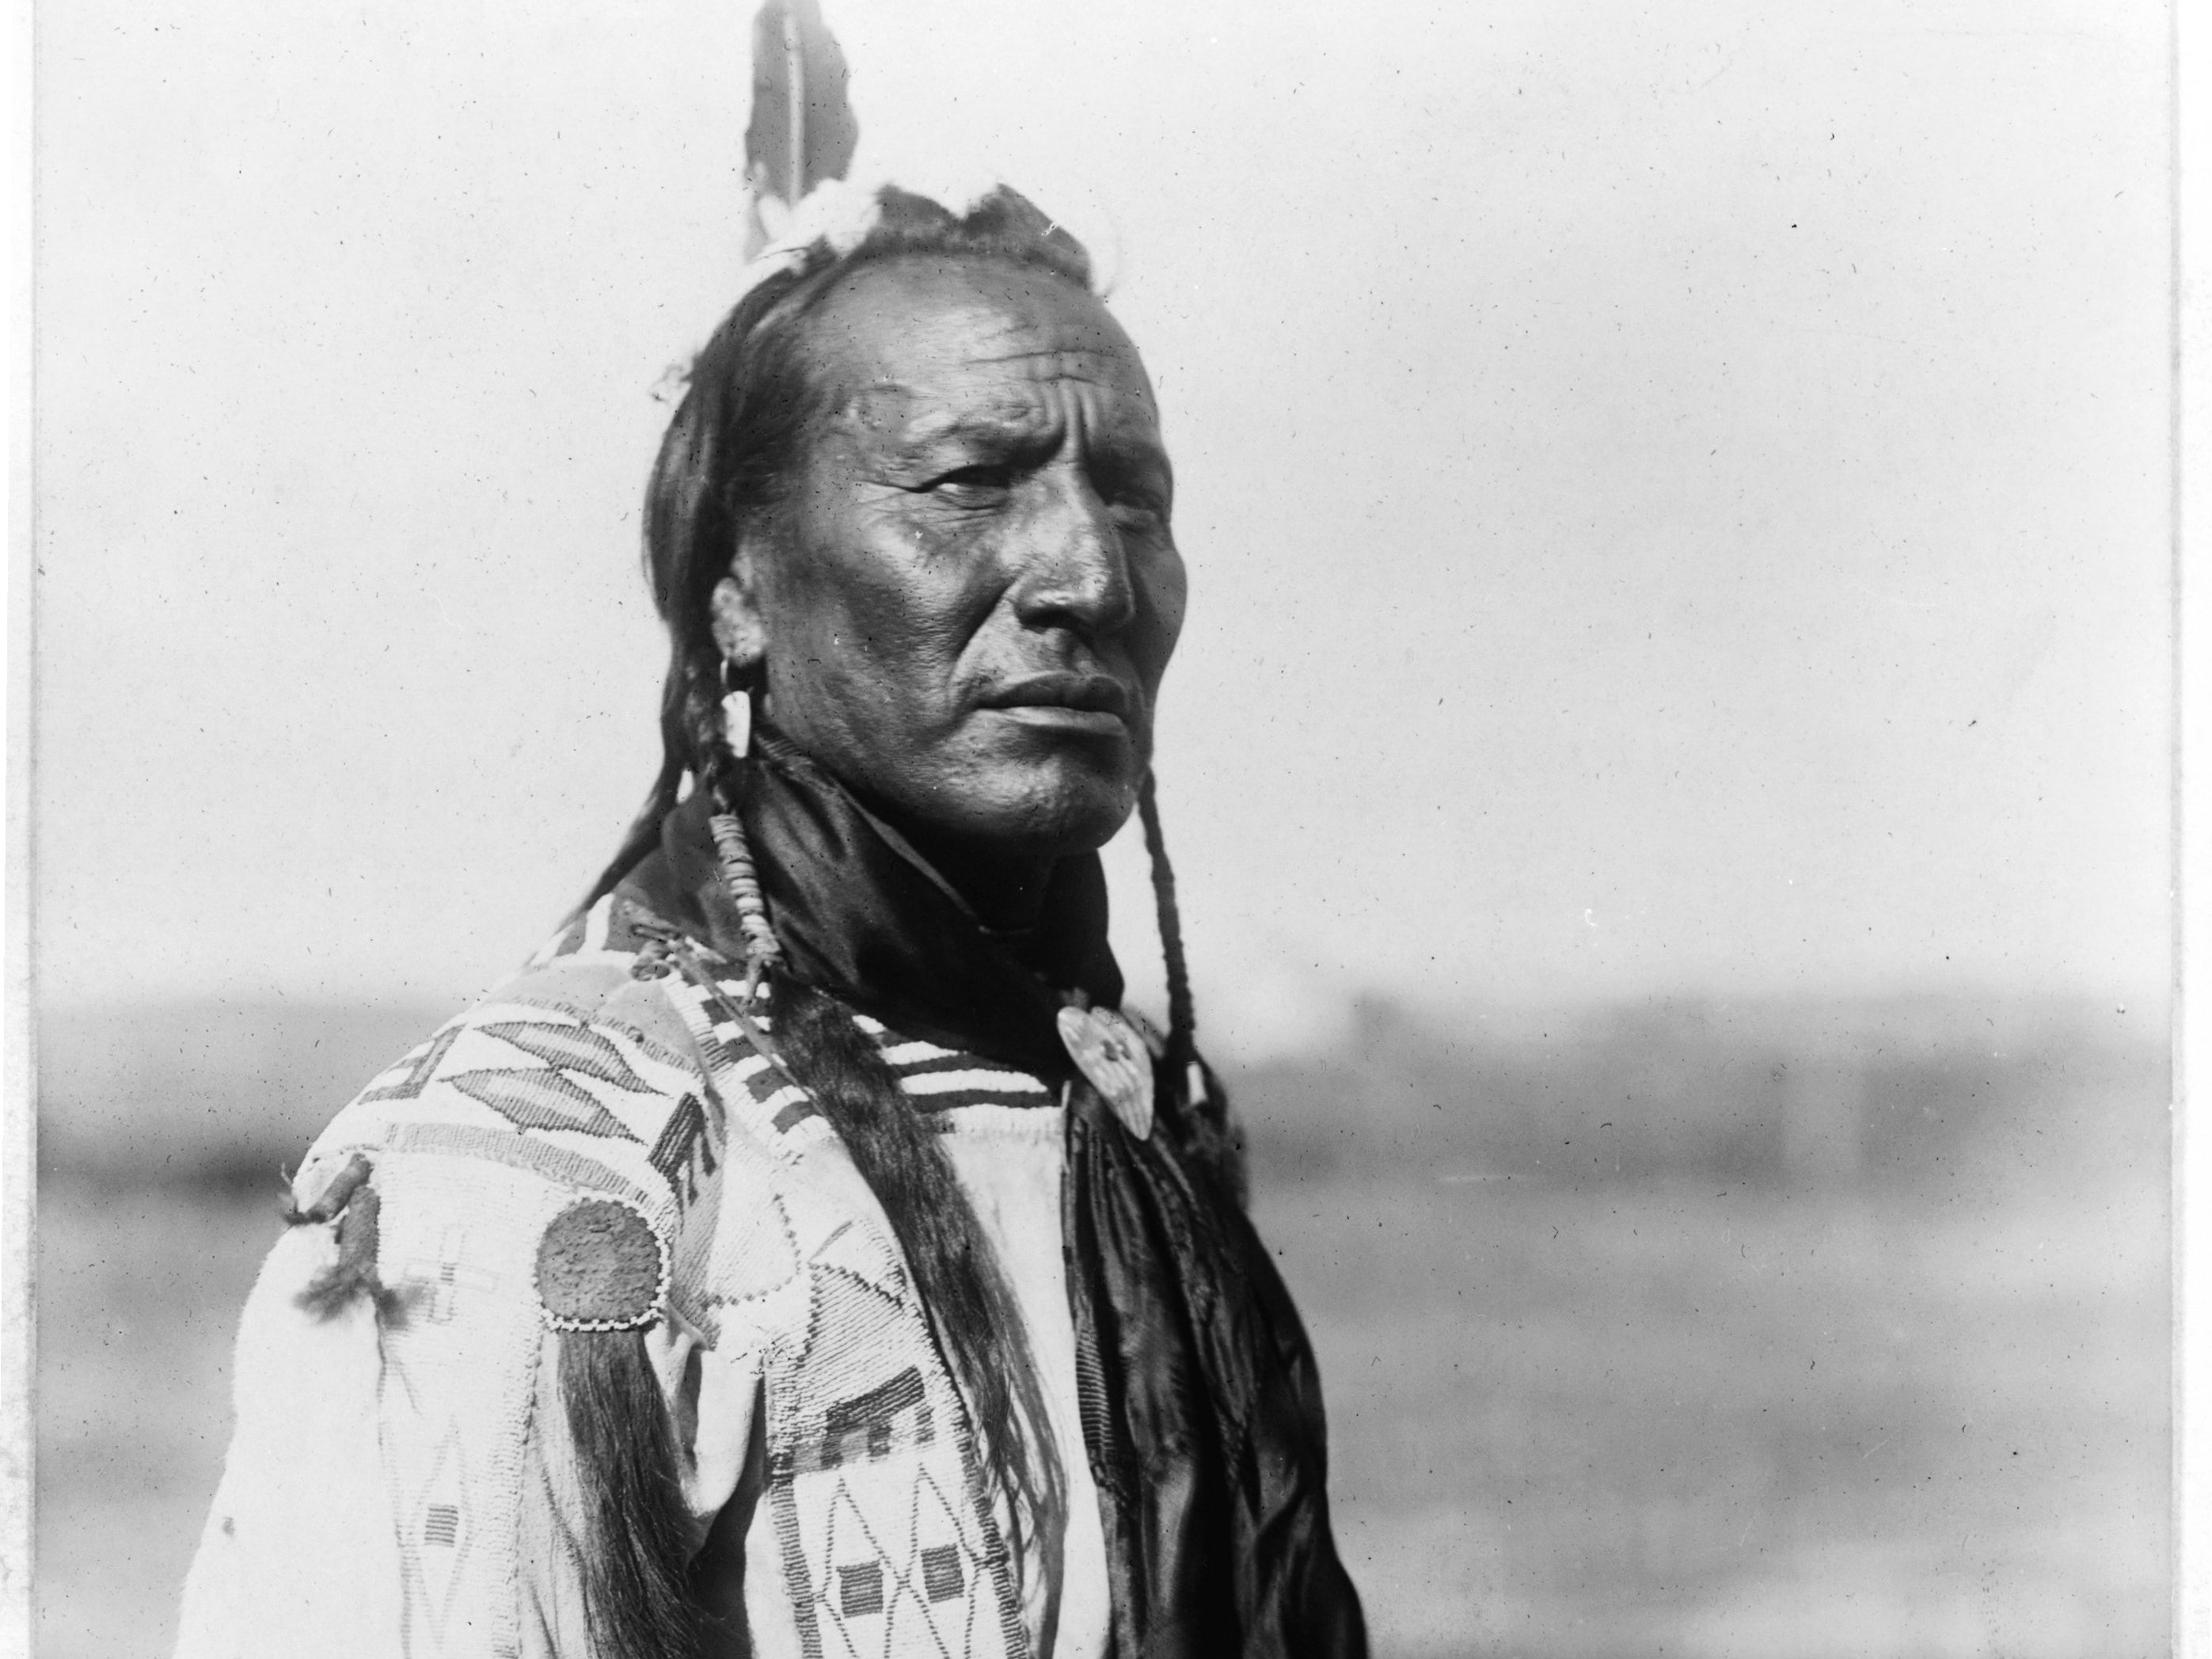 native american, portrait, one person, headshot, real people